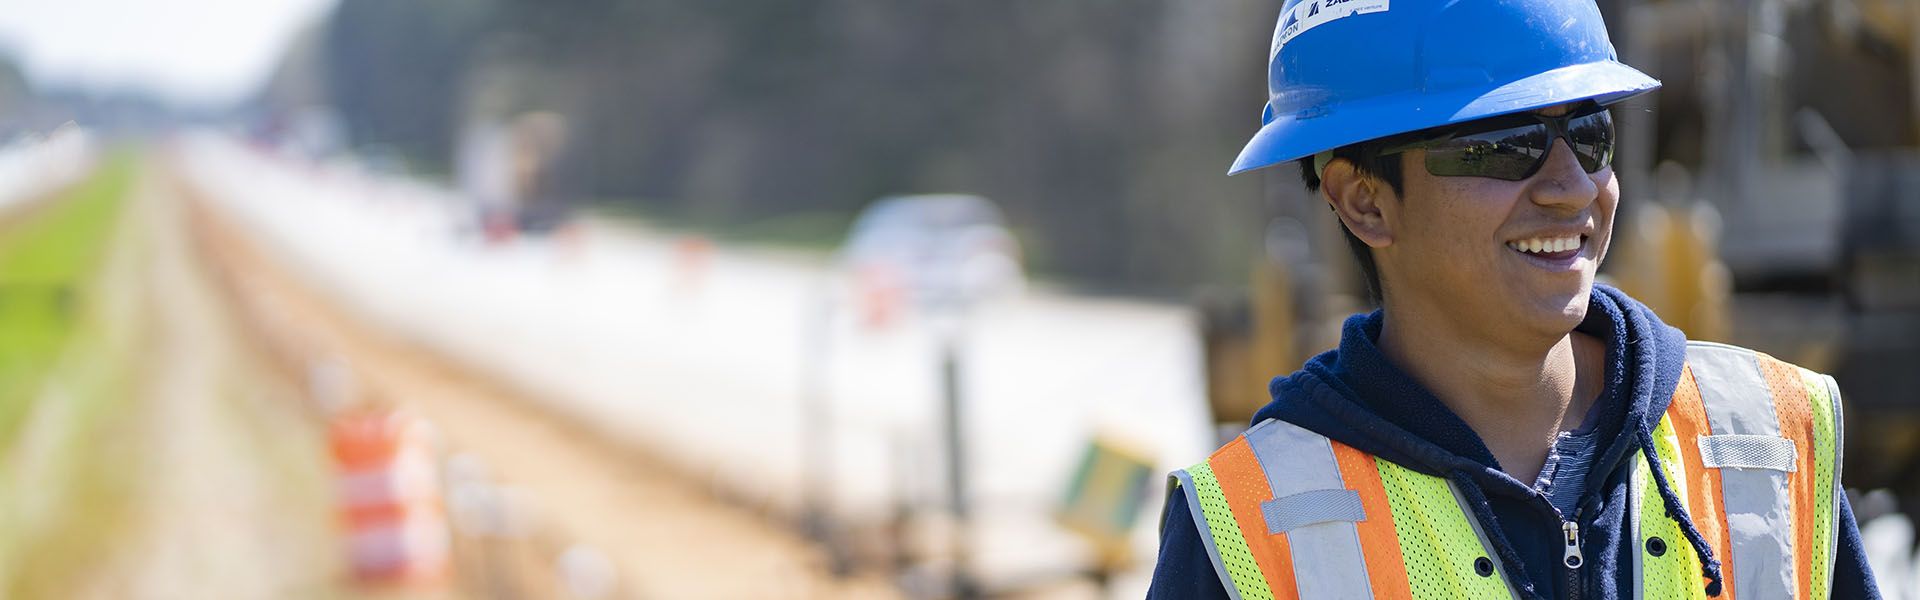 Young man smiling on site of his Georgia construction career wearing a blue construction helmet 